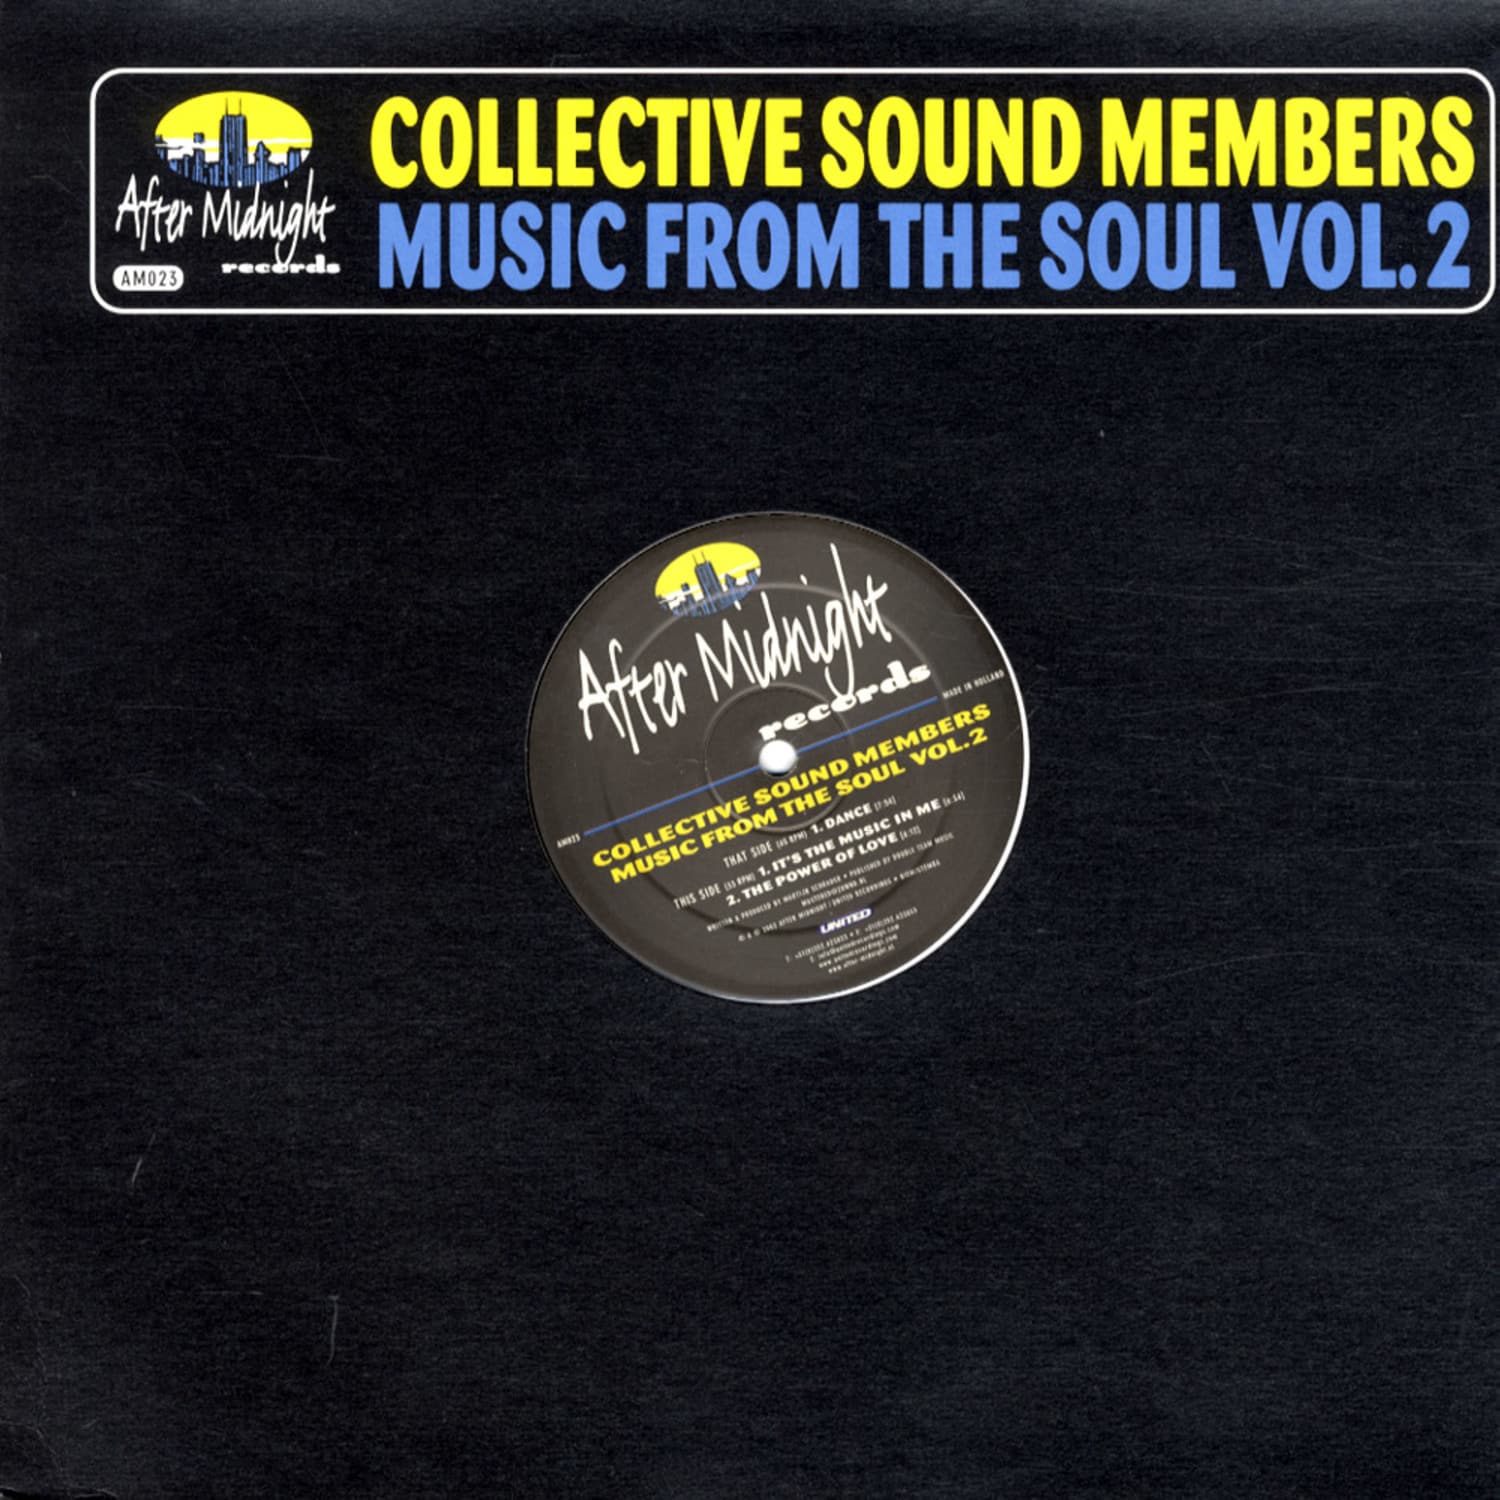 Collective Sound Members - MUSIC FROM THE SOUL VOL. 2